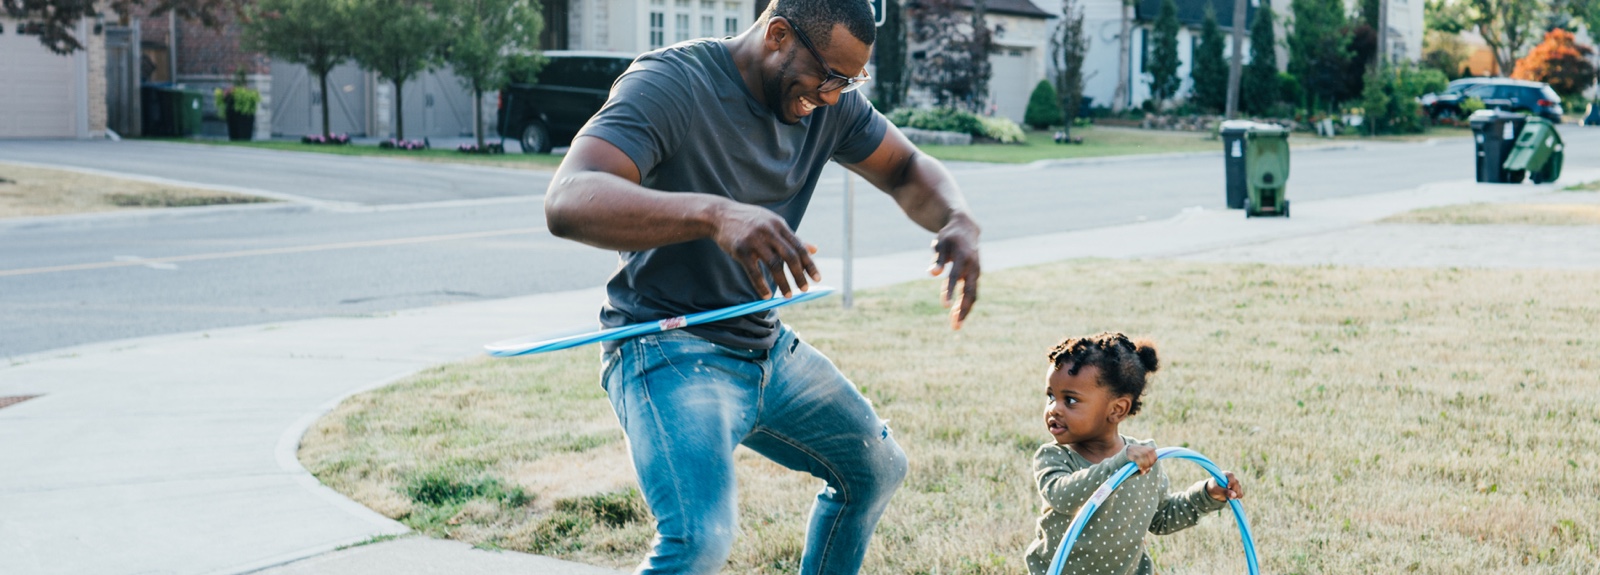 A dad hula hooping with a toddler.